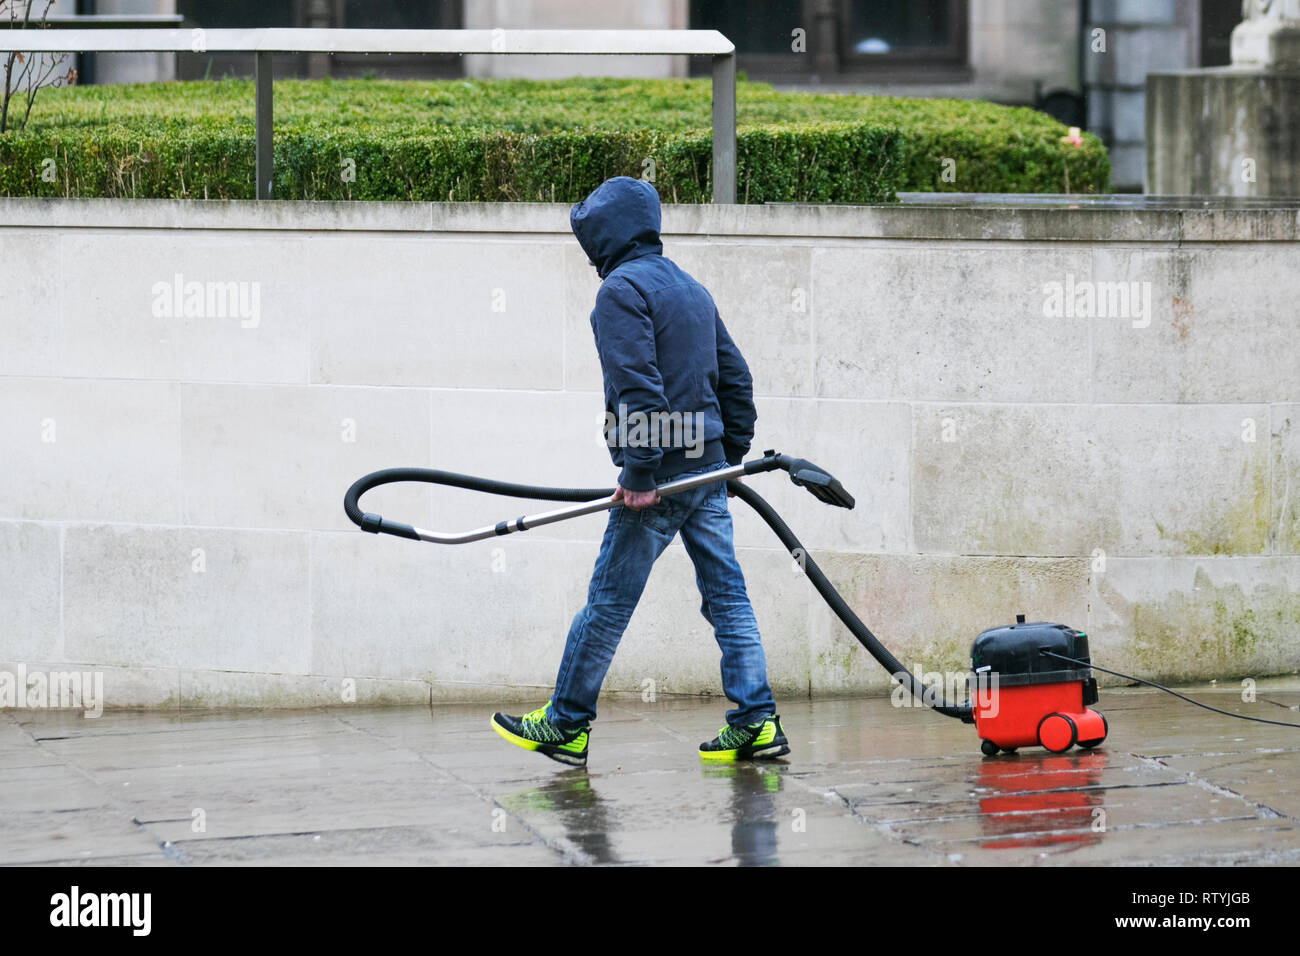 Preston, Lancashire. 3rd March, 2019. UK Weather. Wet start to the day in the city centre with early rain signalling the aproach of Storm Freya expected towards evening. Credit:MWI/AlamyLiveNews. Stock Photo